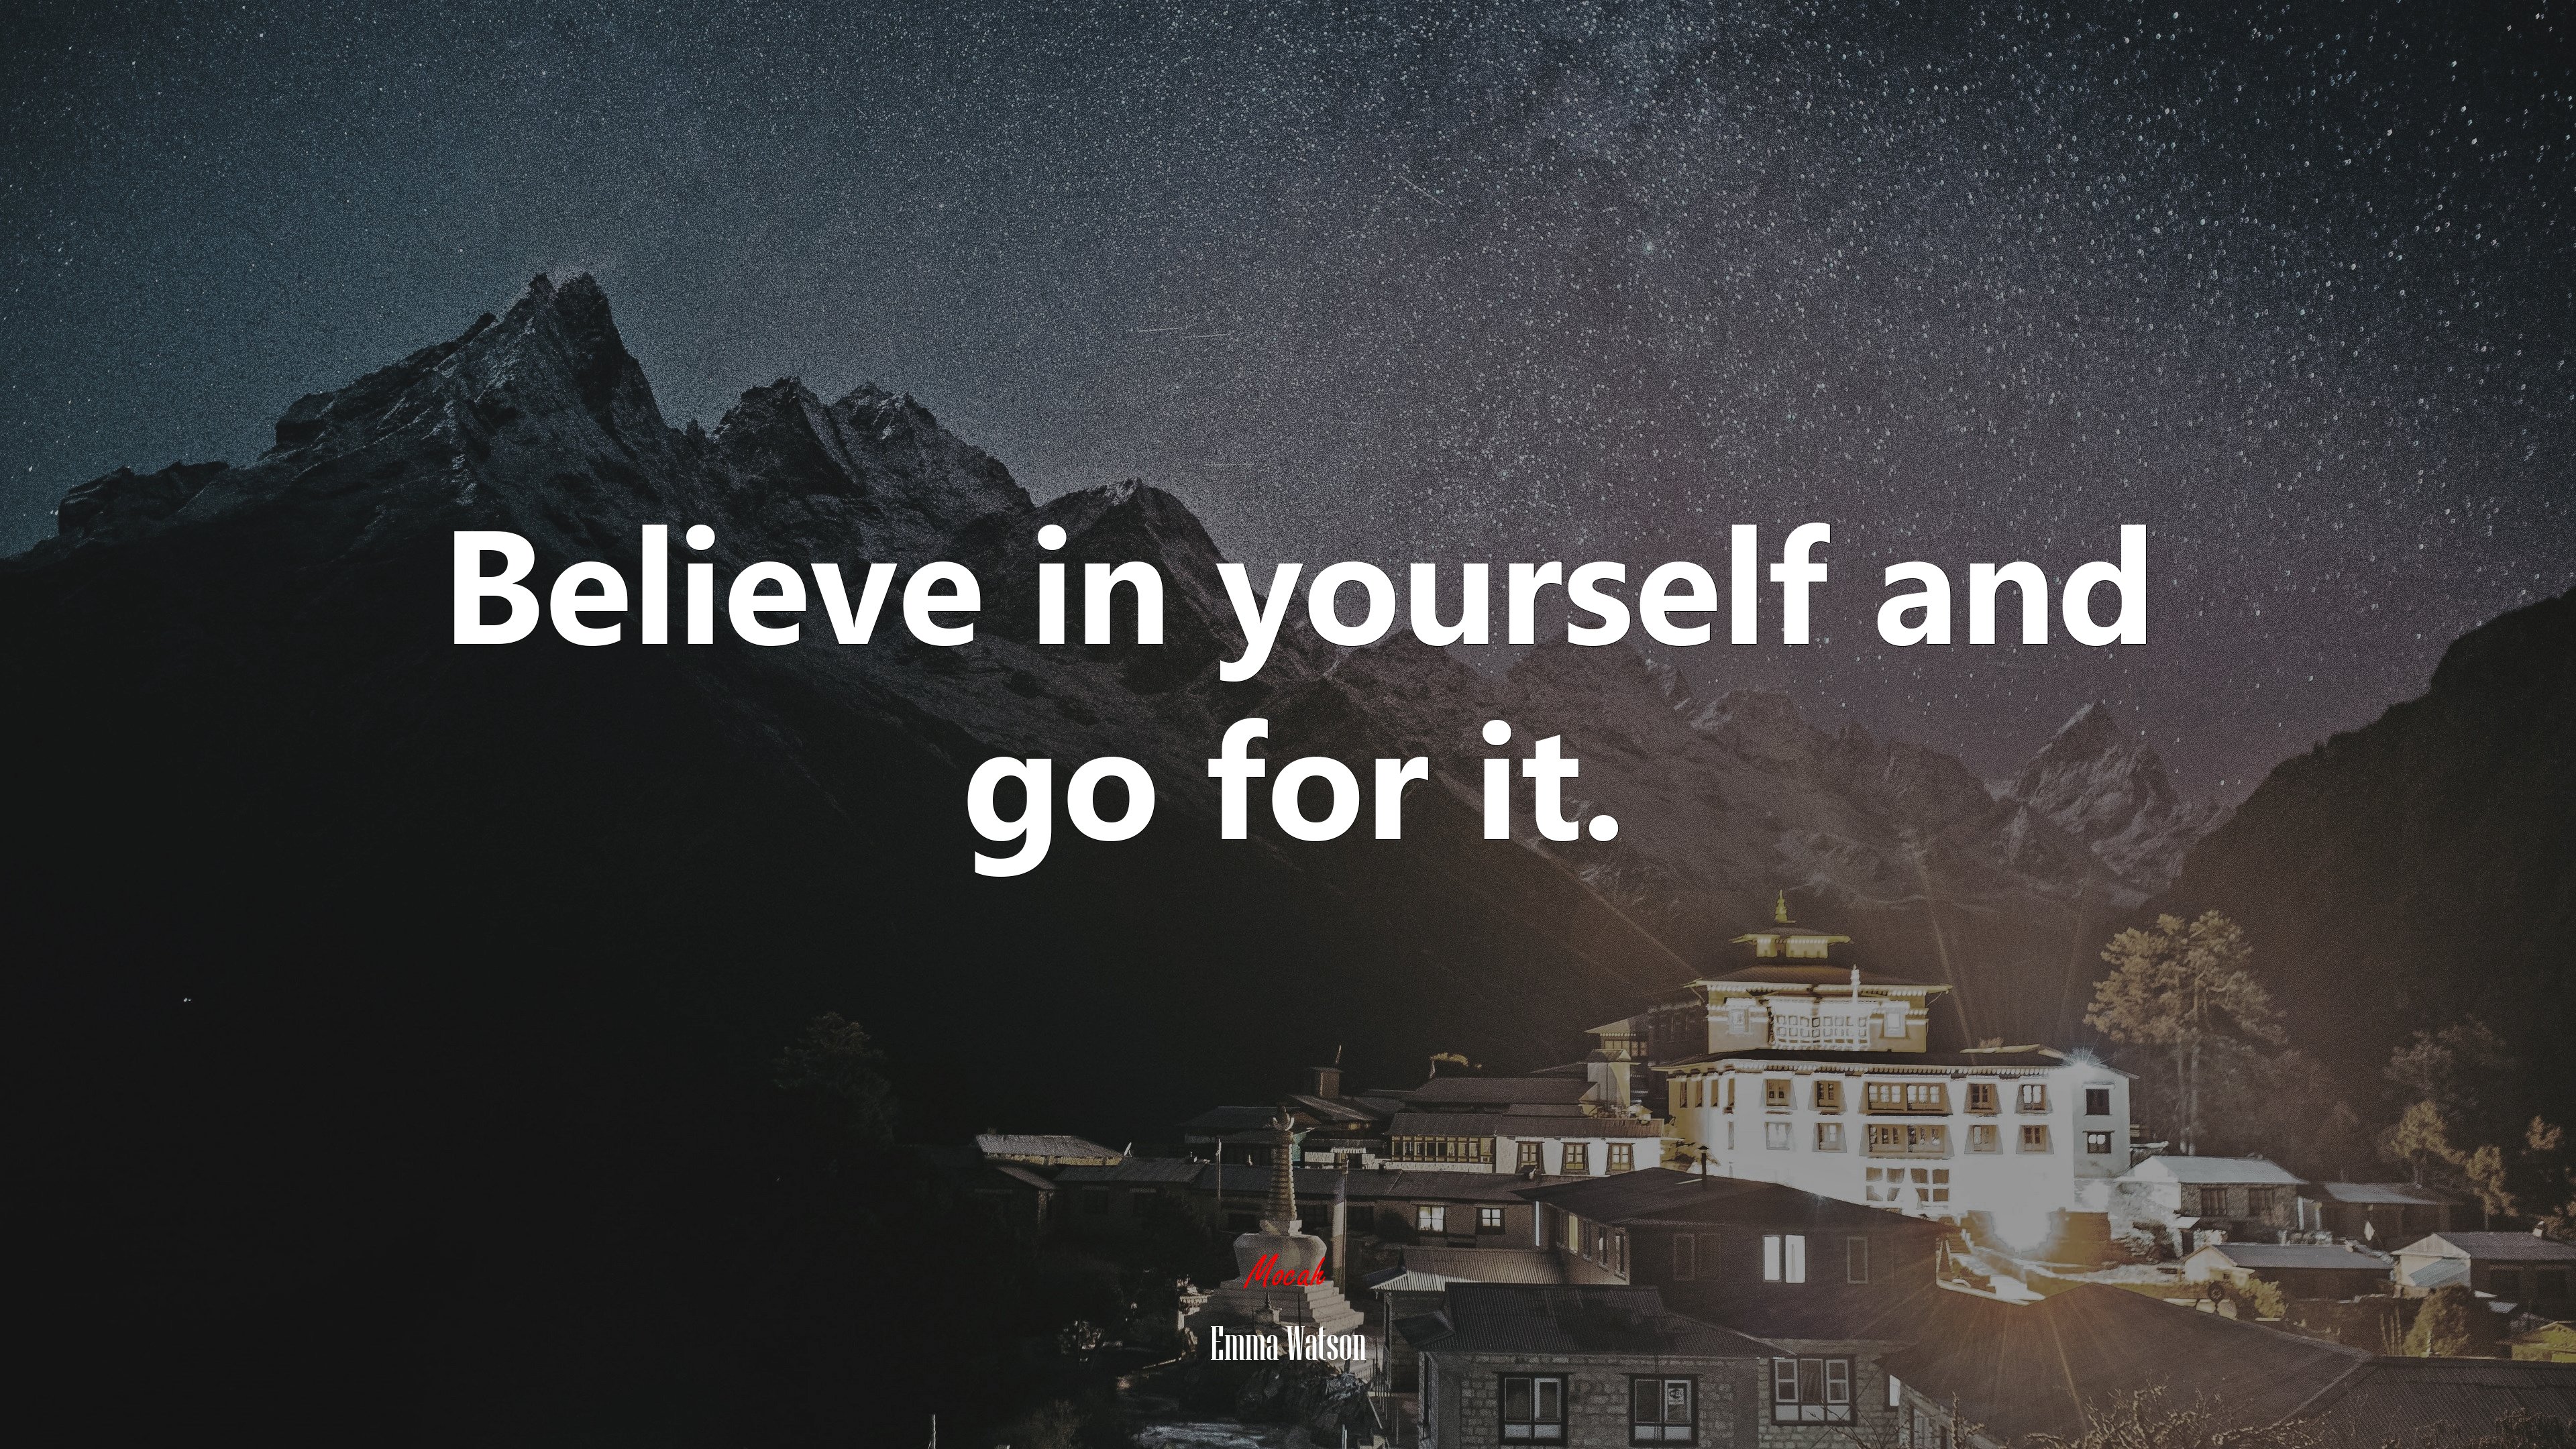 Believe in yourself and go for it emma watson quote